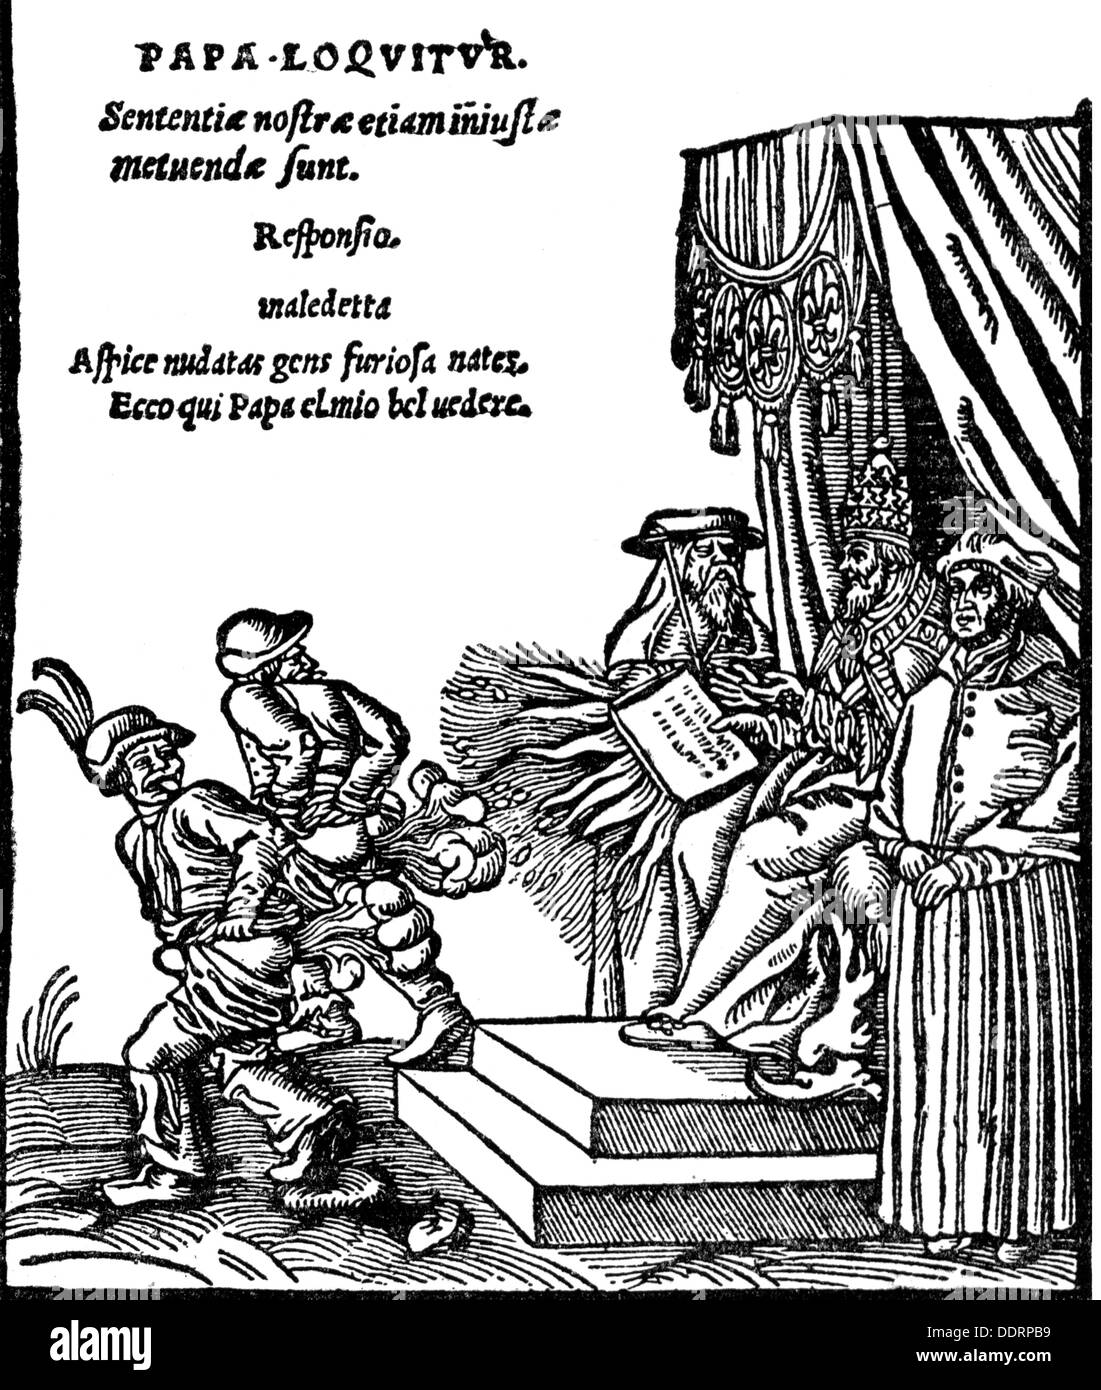 Reformation 1517 - 1555,caricature of ban and kiss on the feet of the Pope,woodcut,Wittenberg,1545,16th century,graphic,graphics,religion,religions,Christianity,Reformation,Protestantism,humor,humour,satire,polemic,polemics,propaganda,Catholic Pope,Pontiff,Popes,papacy,throne,thrones,ban,bans,kiss on the feet,Paul III,cardinal Otto Truchsess von Waldburg,cardinal Albert of Mainz,disrespect,opposition,insurgency,rebellion,insurgencies,revolts,rebellions,in revolt,farts,fart,farting,flatulate,flatulating,caricature,car,Additional-Rights-Clearences-Not Available Stock Photo